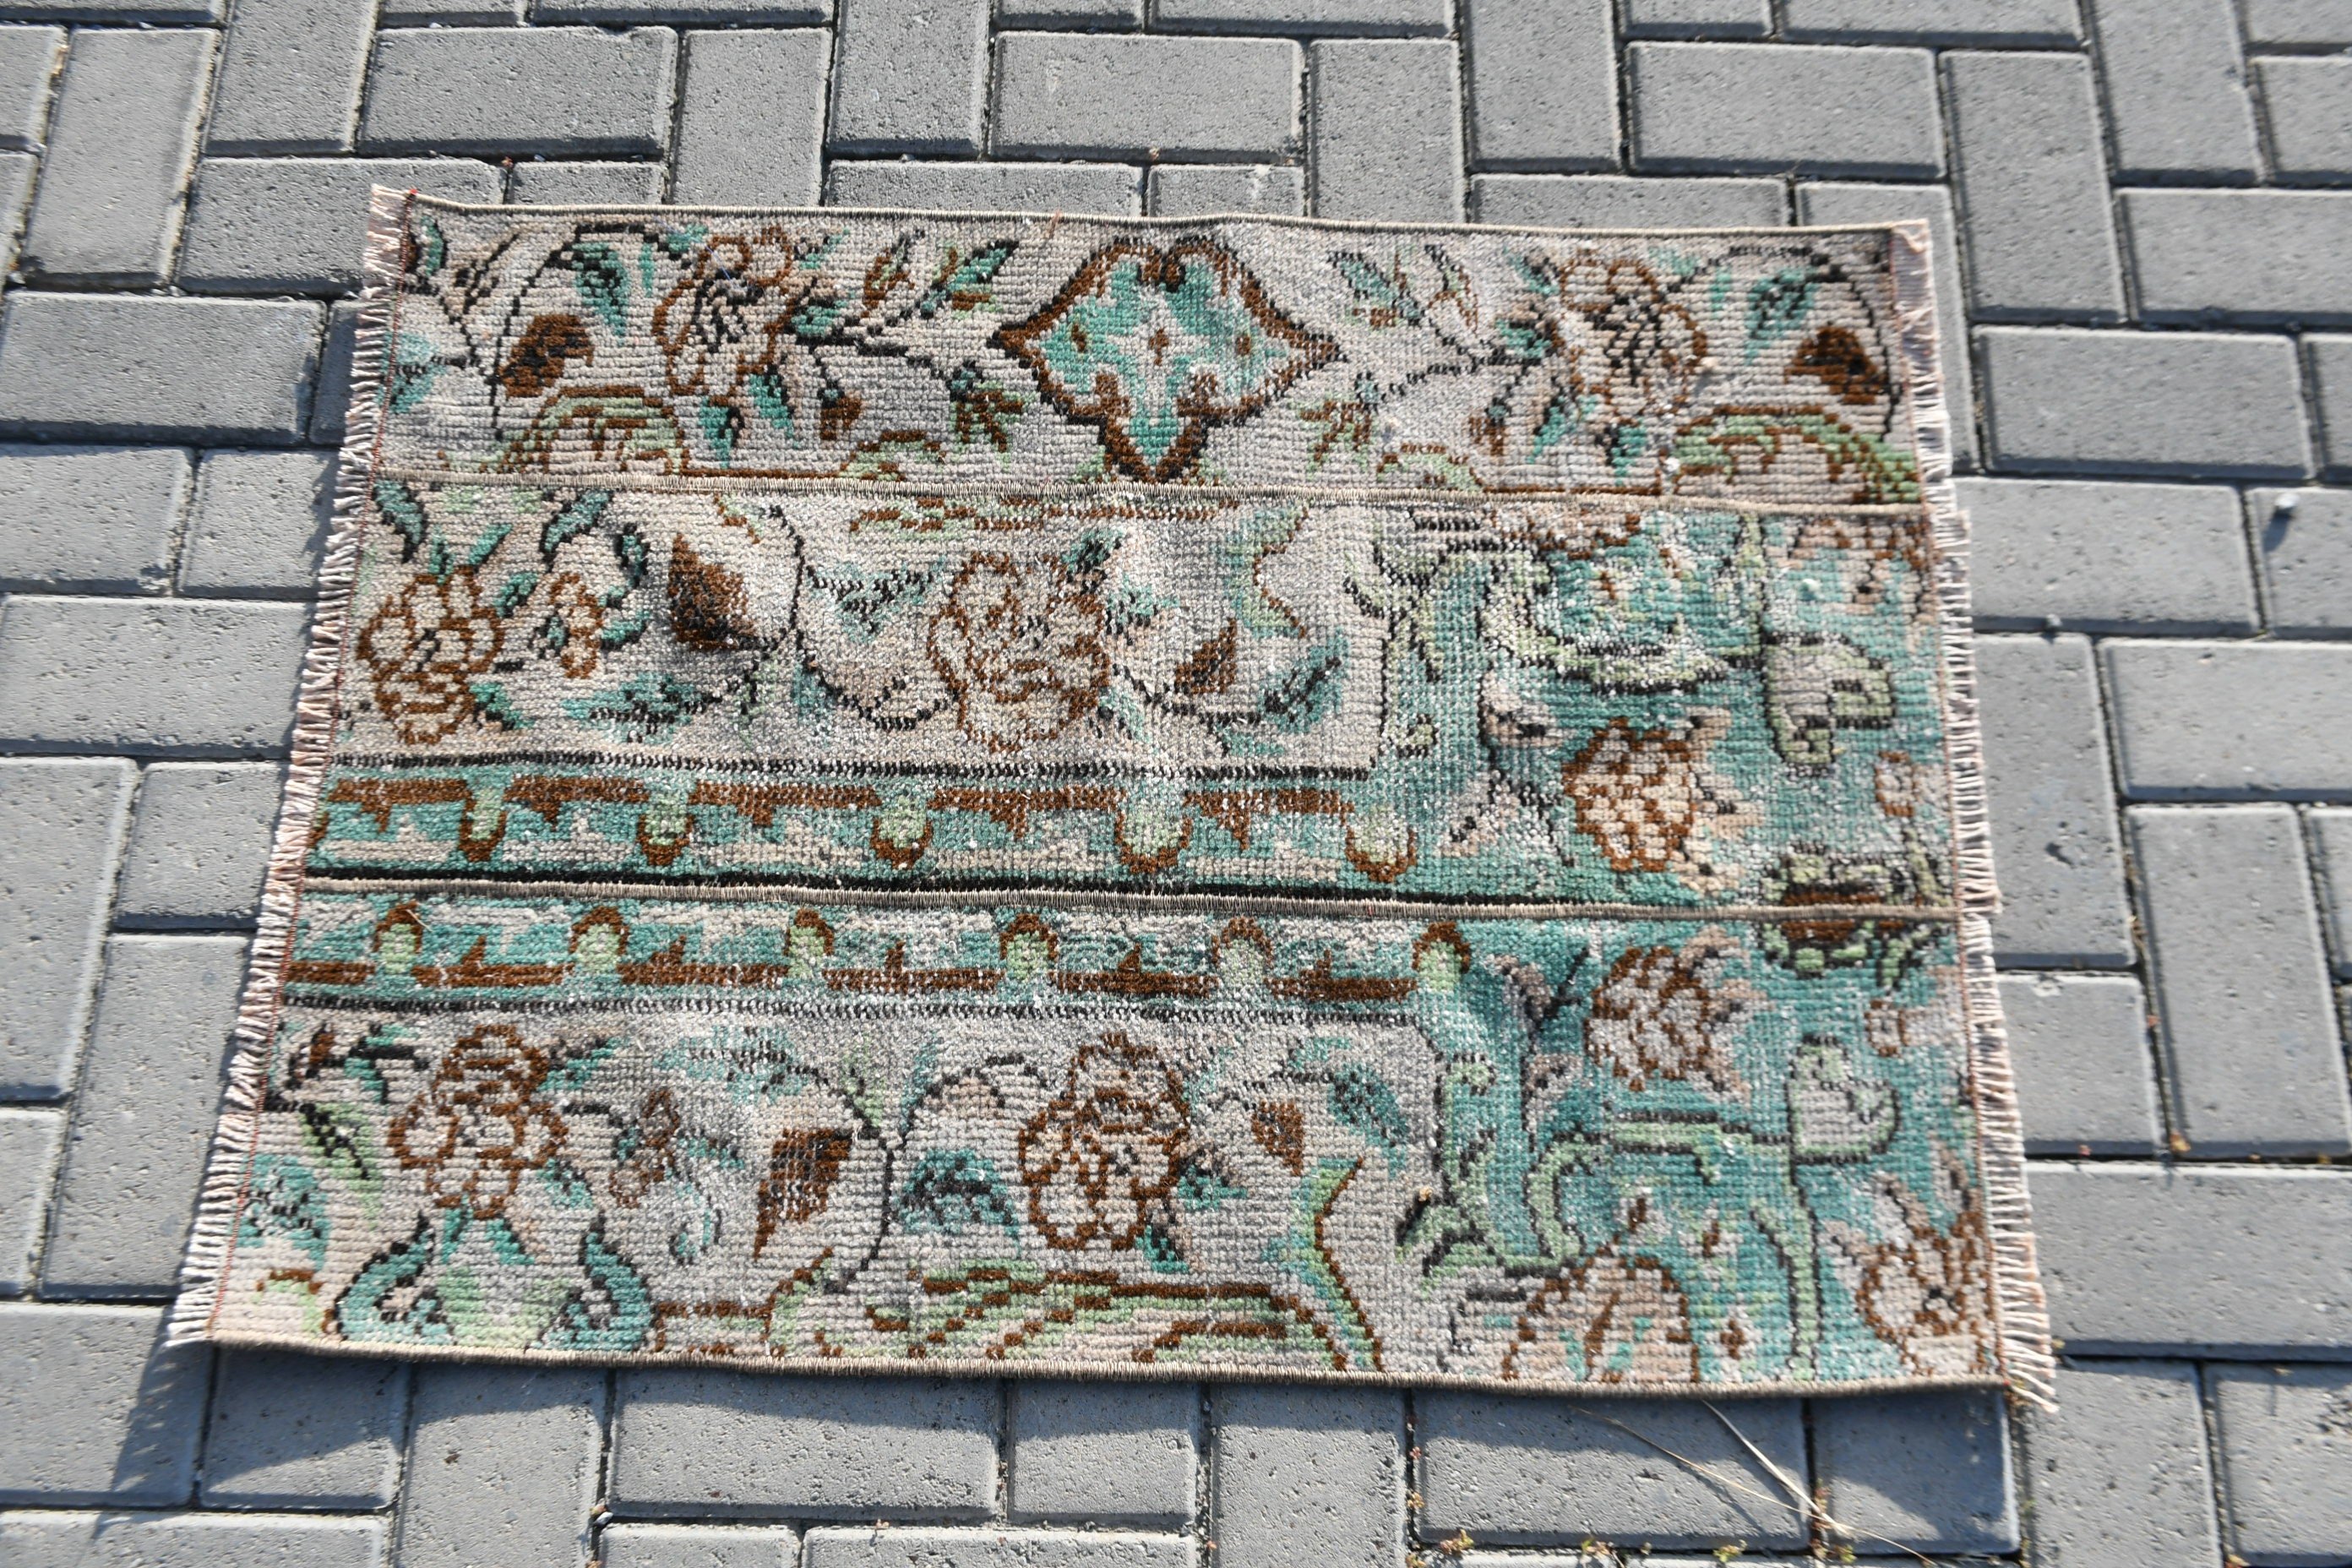 Entry Rug, 2.3x3 ft Small Rug, Home Decor Rug, Vintage Rug, Wall Hanging Rugs, Turkish Rug, Wool Rugs, Rugs for Bedroom, Green Cool Rug